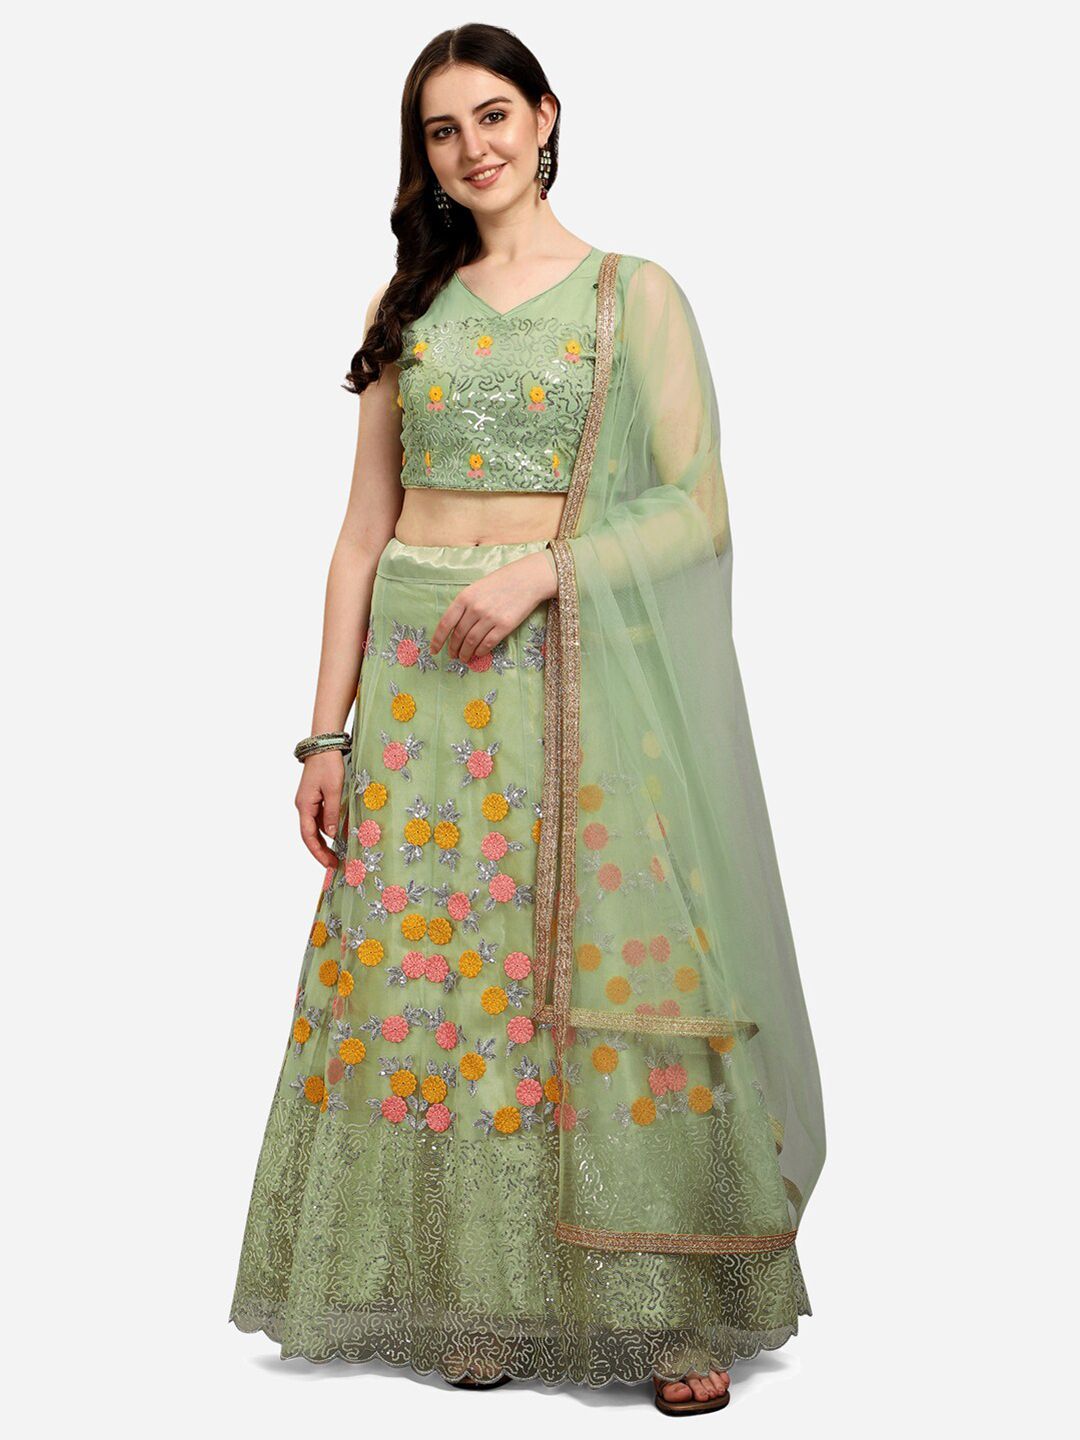 Satrani Olive Green & Pink Embroidered Semi-Stitched Lehenga & Blouse With Dupatta Price in India